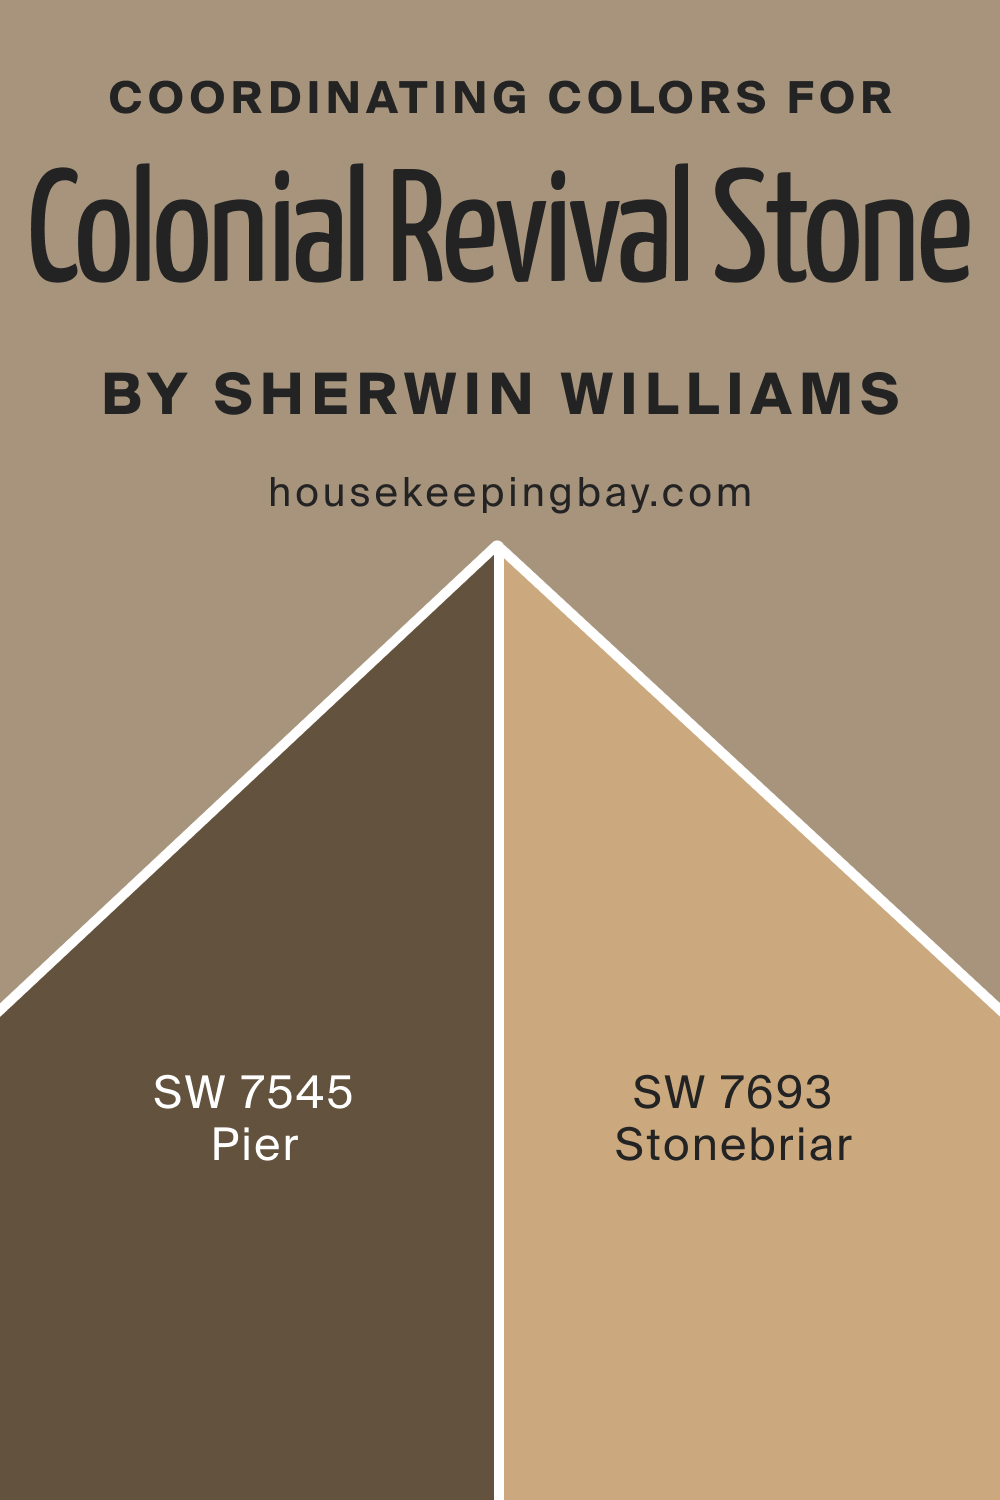 Coordinating Colors for SW 2827 Colonial Revival Stone by Sherwin Williams